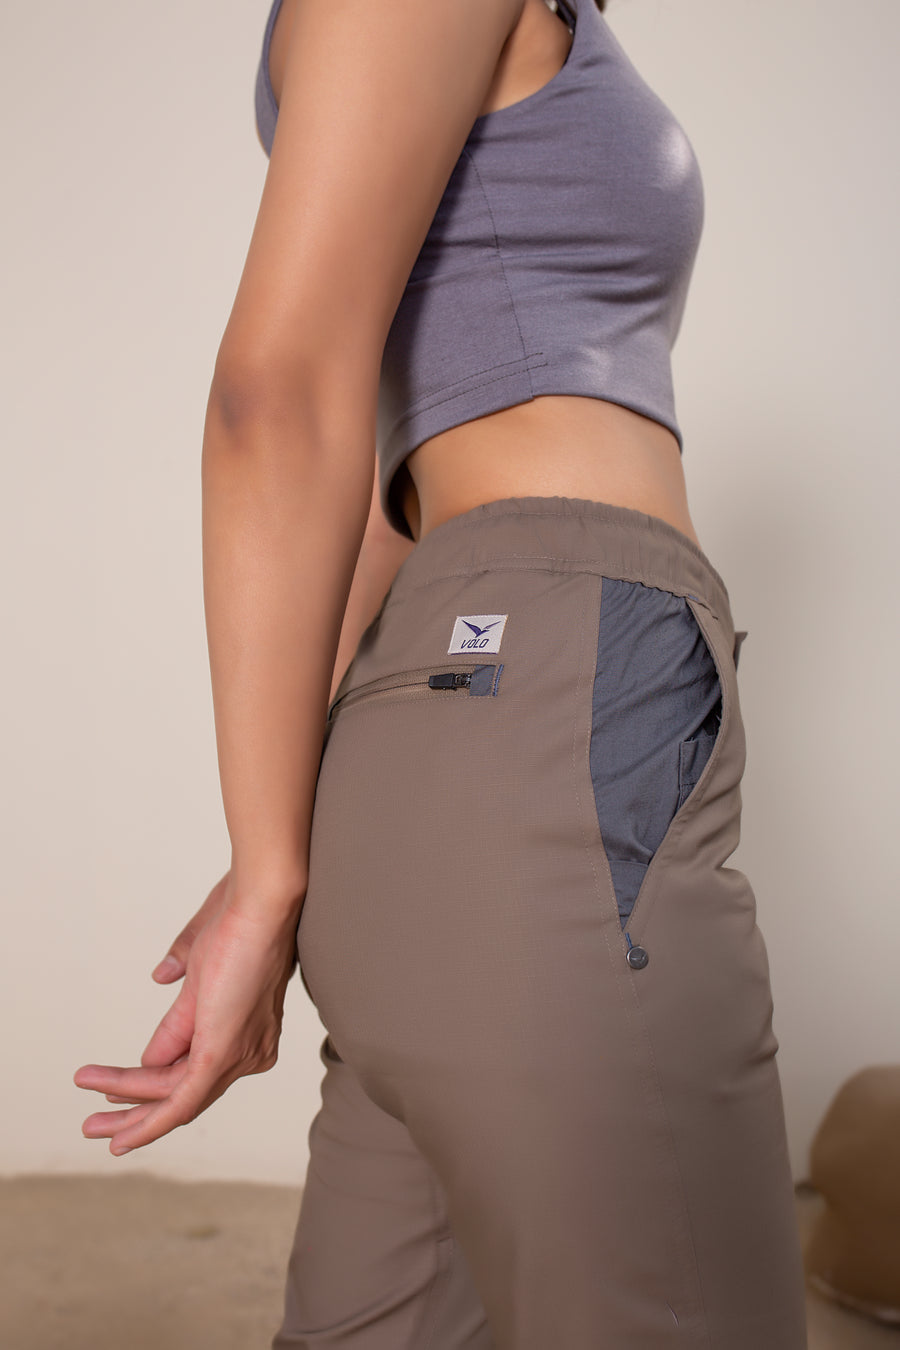 Women's Yosemite Rip Stop in Coffee | VOLO Apparel | Made with a durable stretch rip stop, the Yosemite Rip Stop pant is our ultimate six pocket lifestyle pant. Featuring a 3 point gusset, snap button security pockets, 2 zipper pockets and the comfort of cotton ripstop, these are your go to adventure pants. Designed to take you from the summit, to the city.